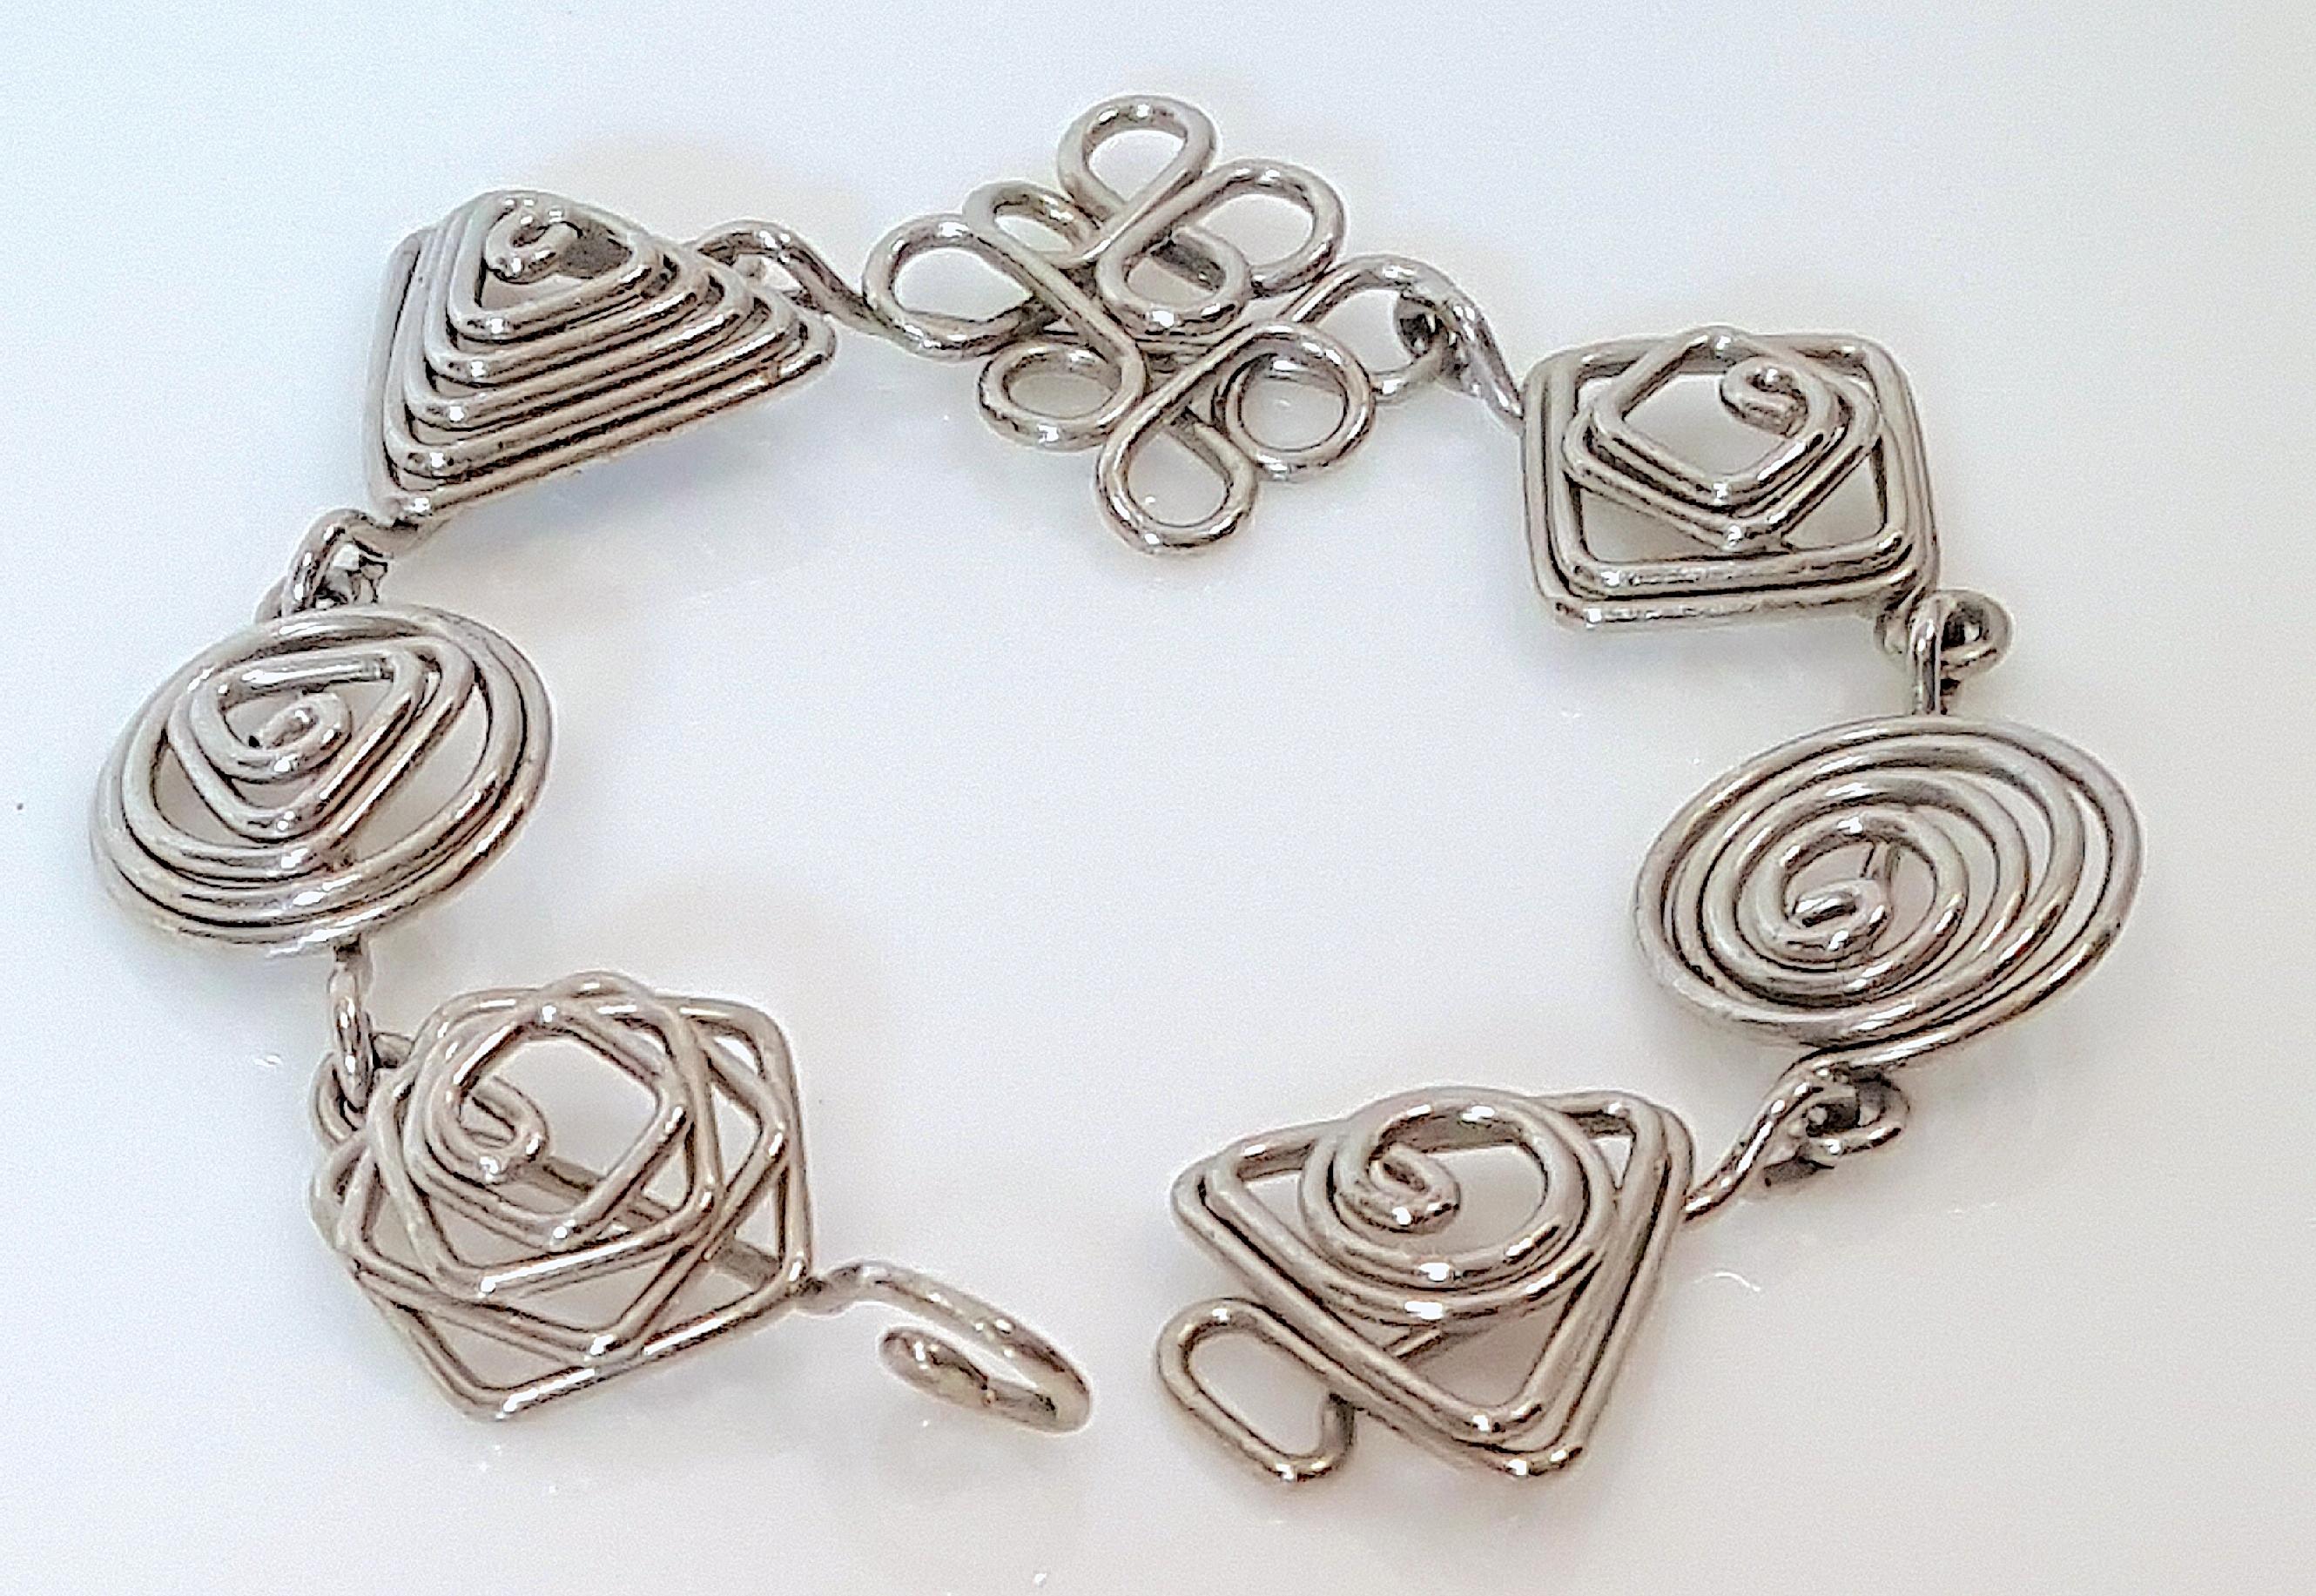 This modern one-of-a-kind geometric-spirals seven-link bracelet was expertly handmade from silver wire dating to the 20th Century in a style not earlier than Art Deco. There are no marks or jewelry techniques other than from the pliers used to bend